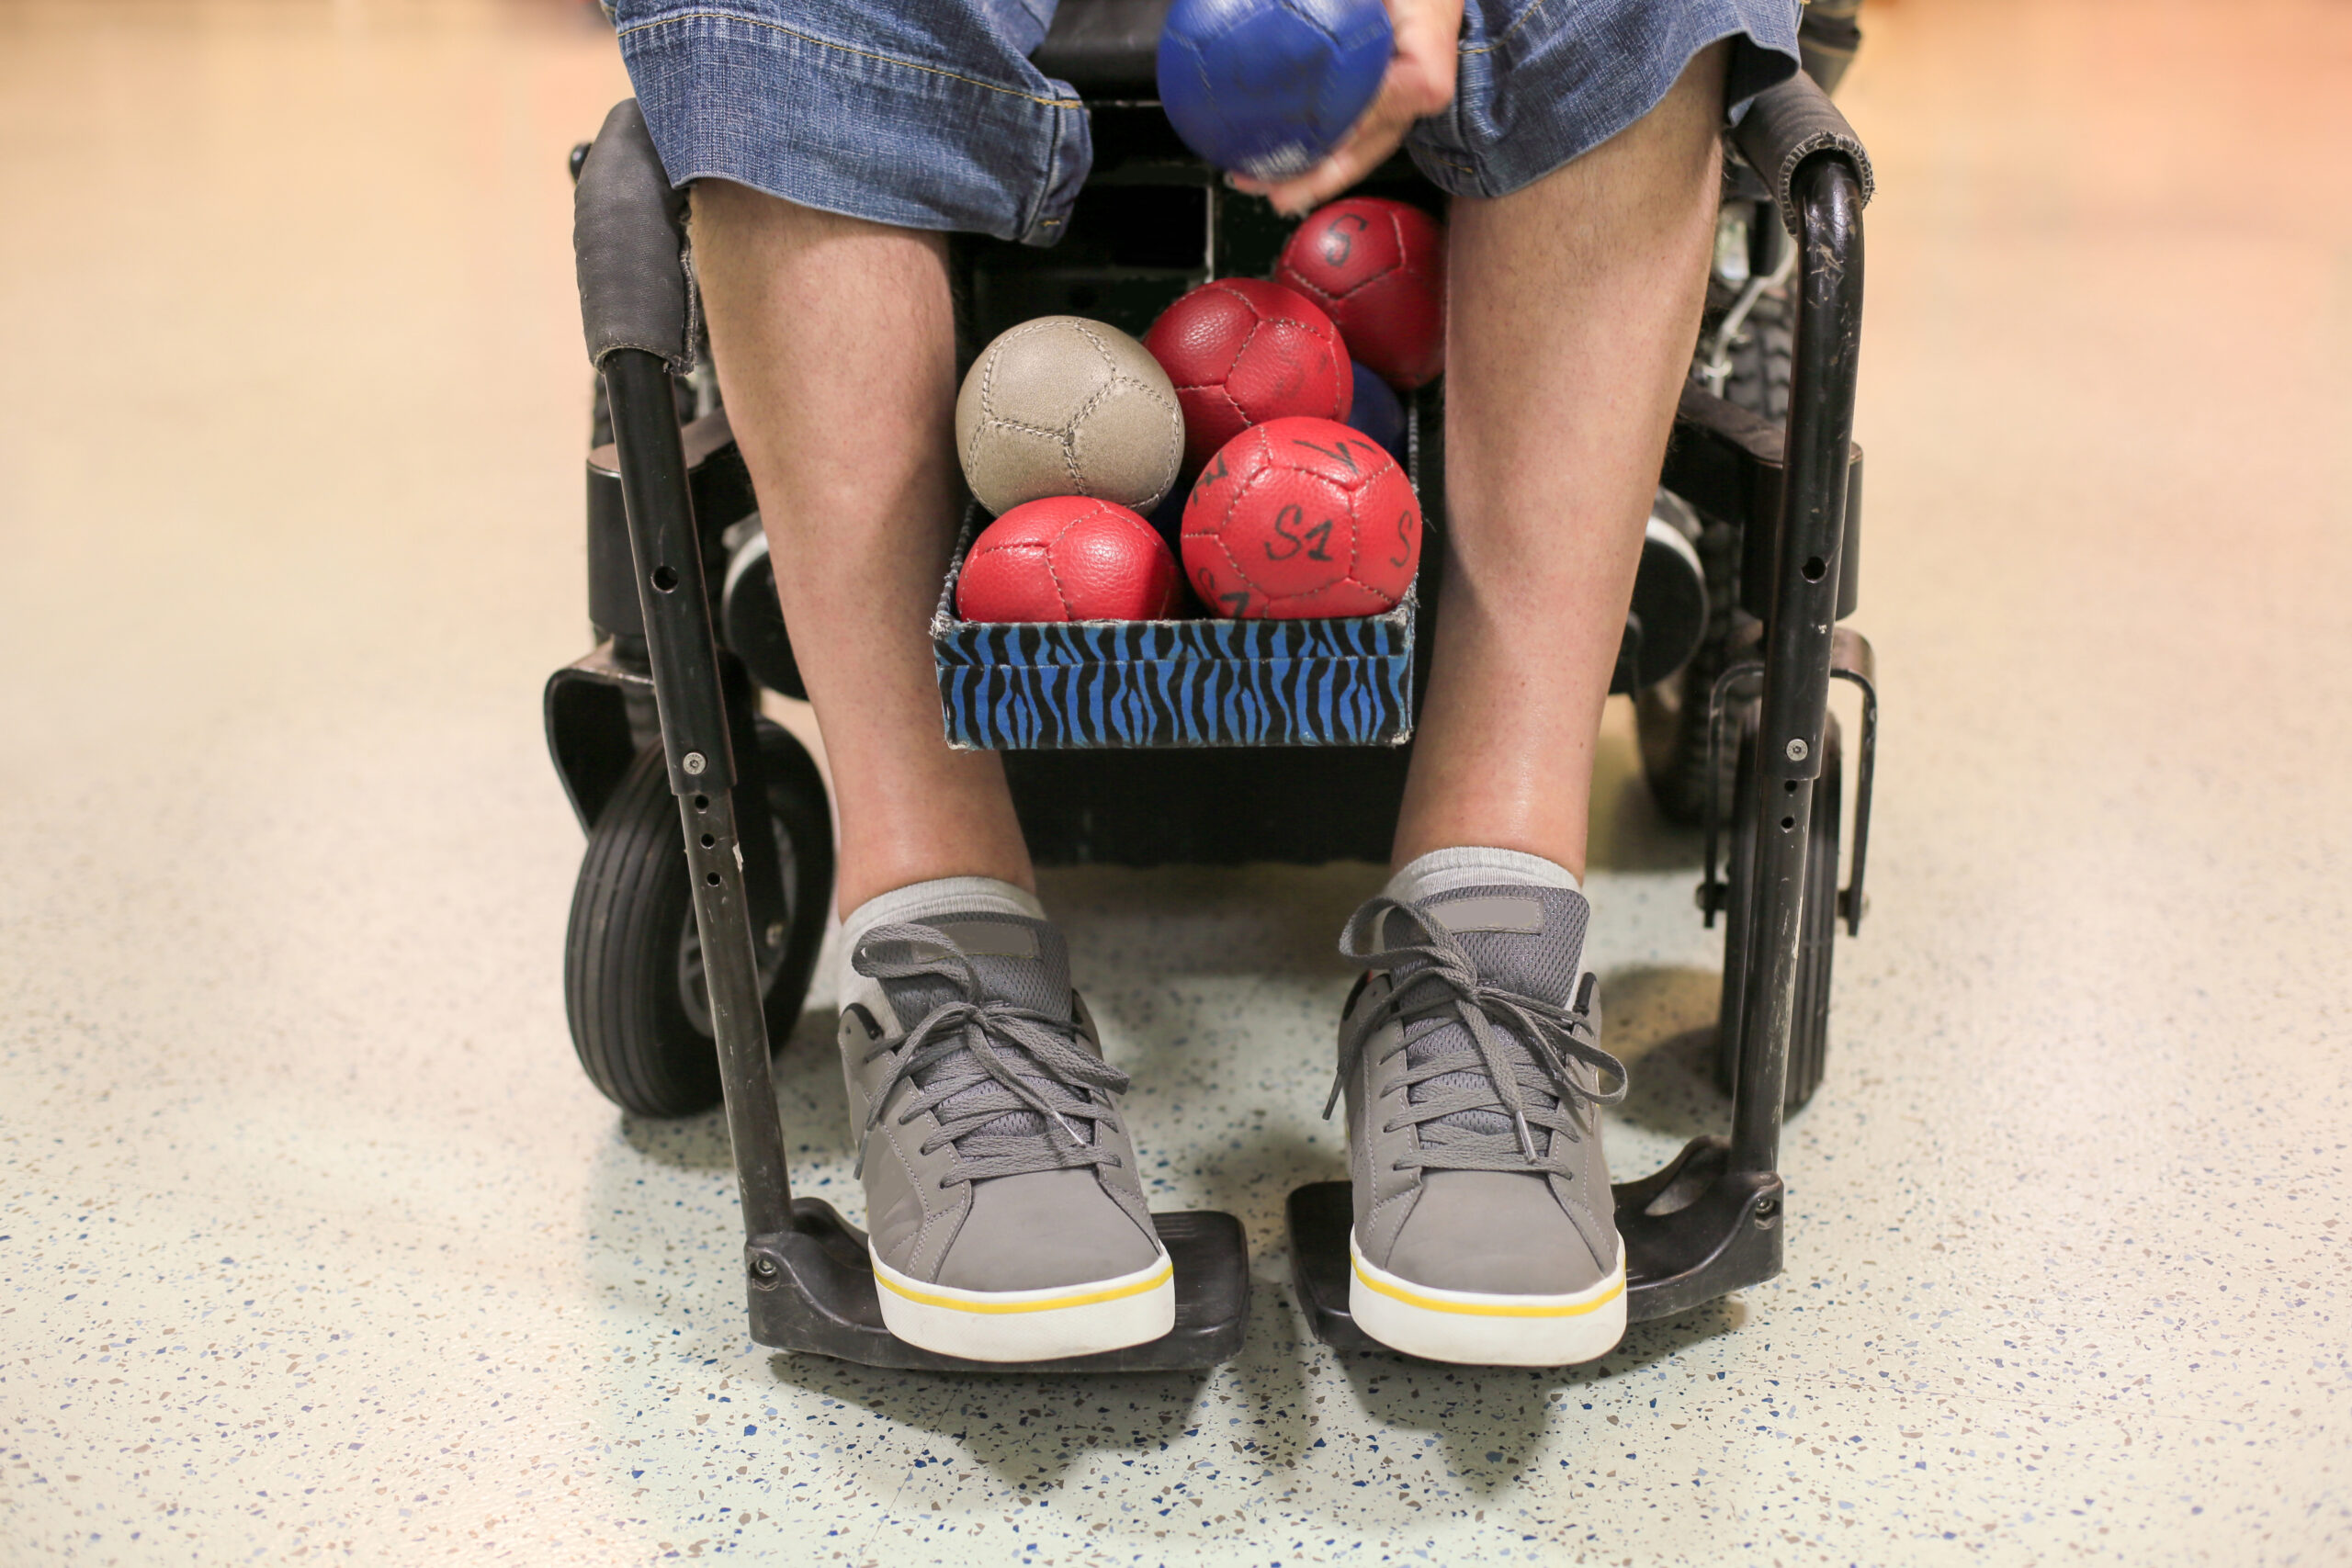 Disabled Boccia player training on a wheelchair